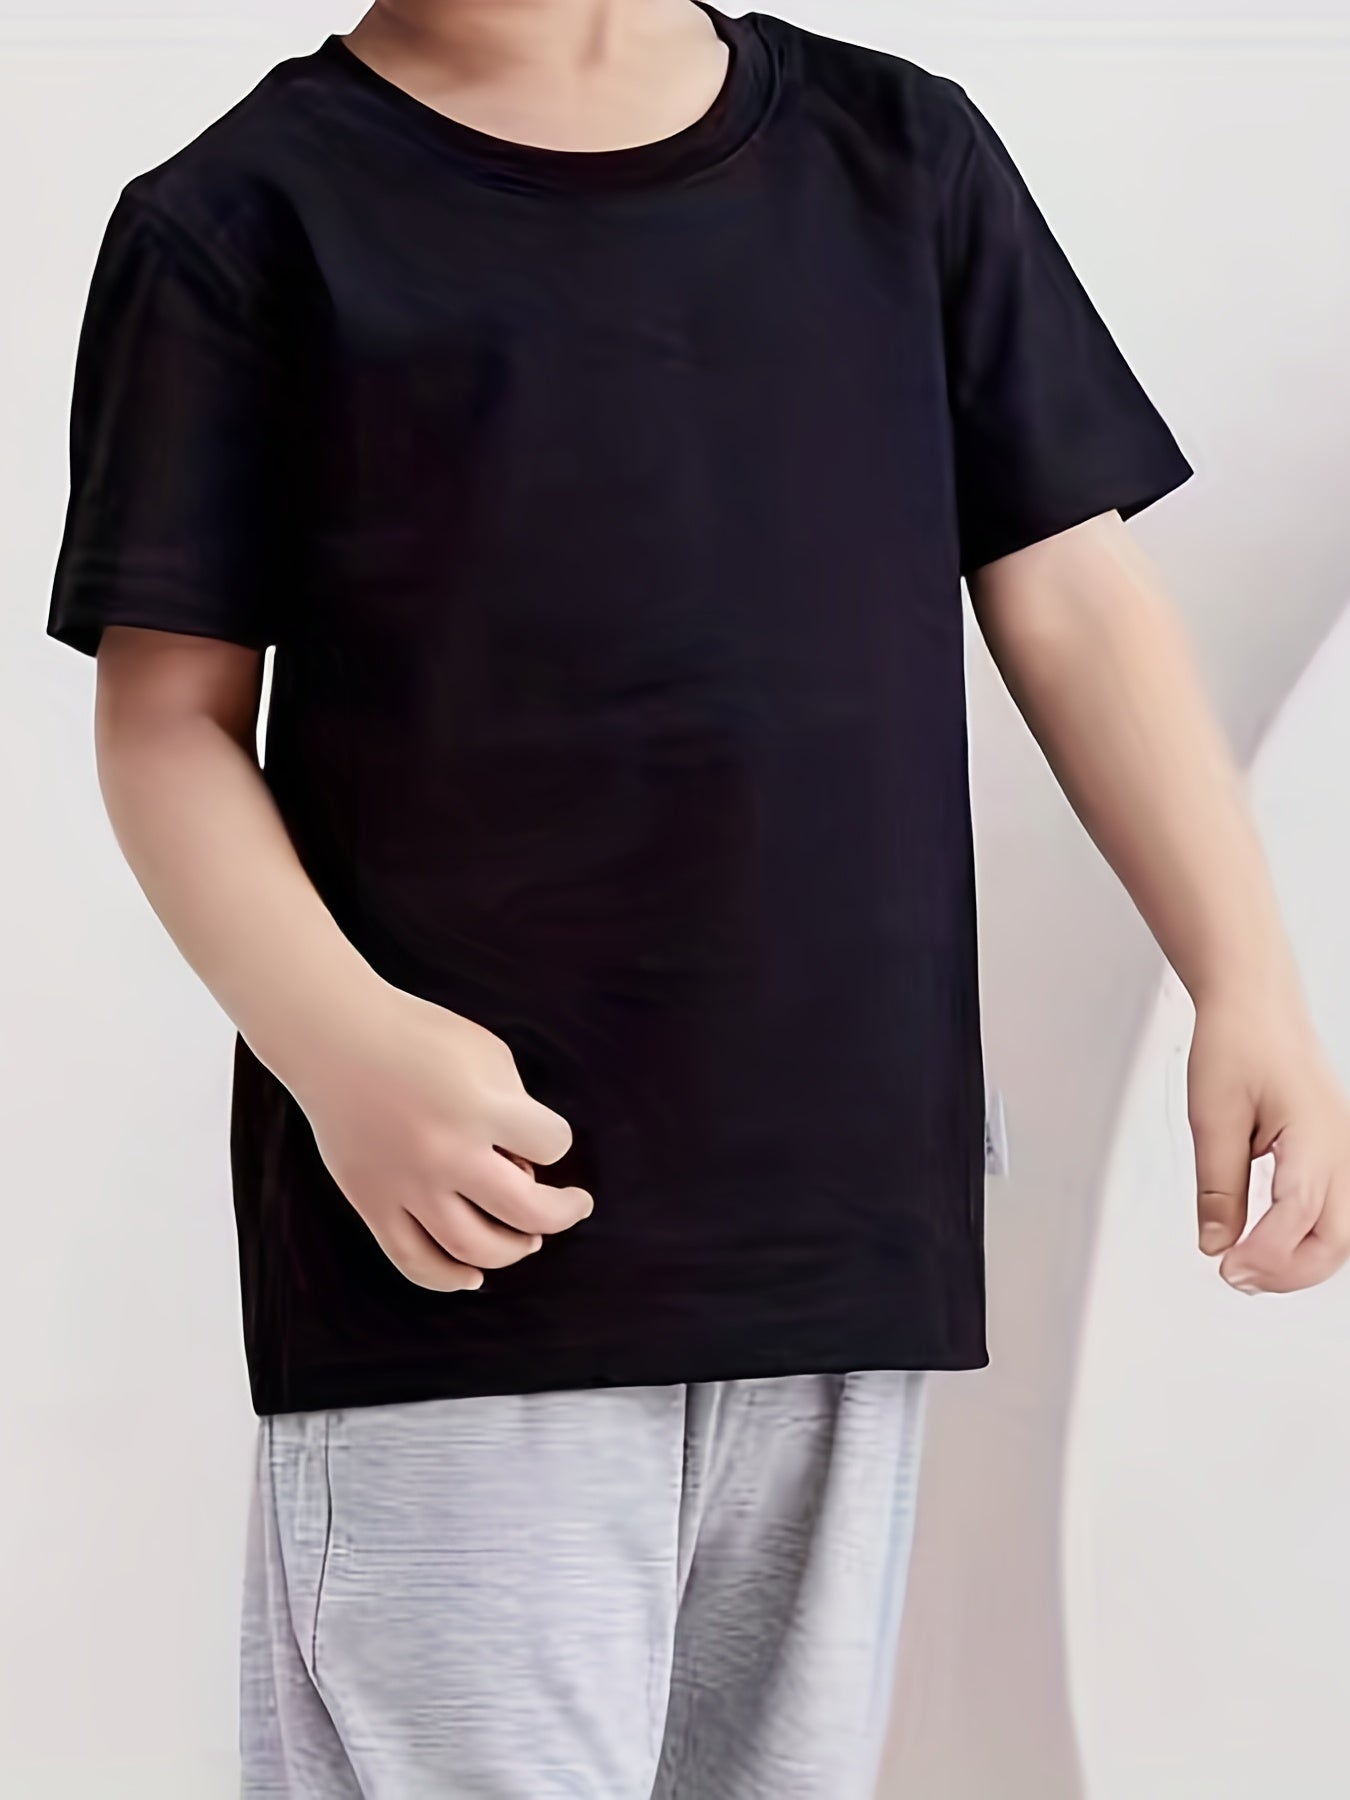 Boys Round Neck T-shirt Tee Top Casual Soft Comfortable For Summer Kids Clothes